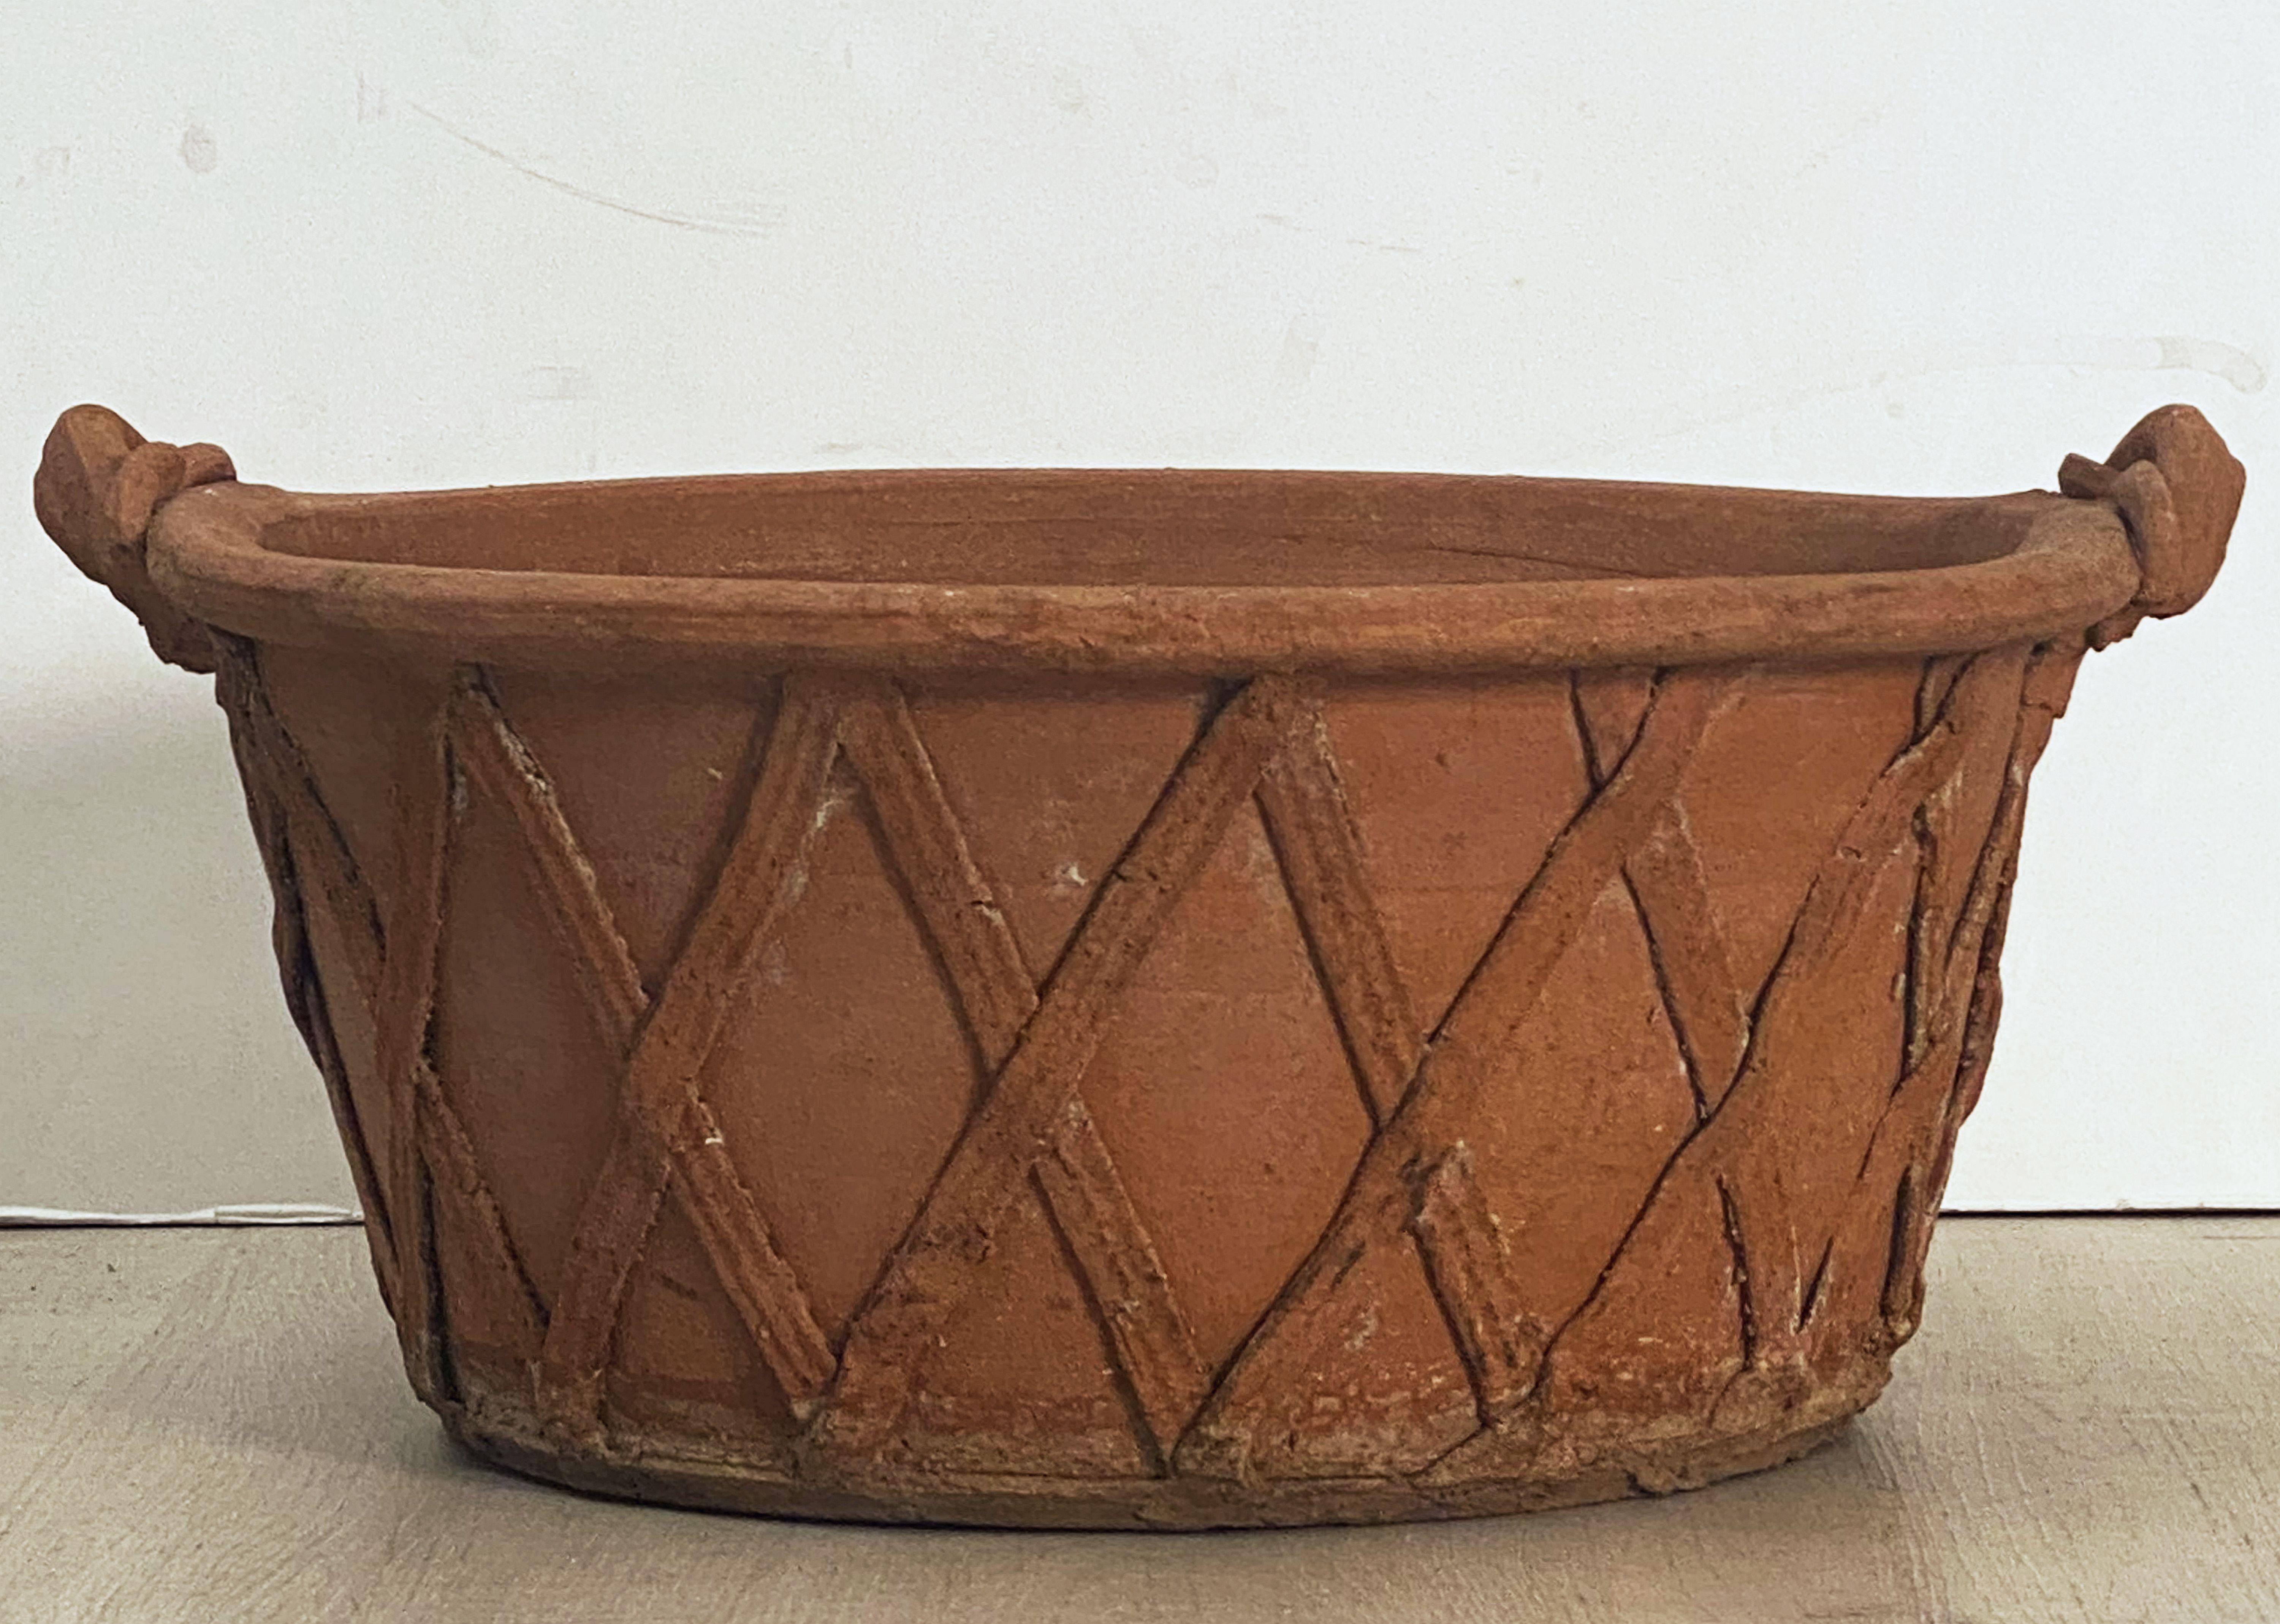 A fine large English round garden urn or planter pot or bowl of terracotta, 20 1/2 inches in diameter, featuring a stylized lattice or strapwork raised relief around the circumference and a rolled edge to the rim and handles.

Dimensions: Height 9